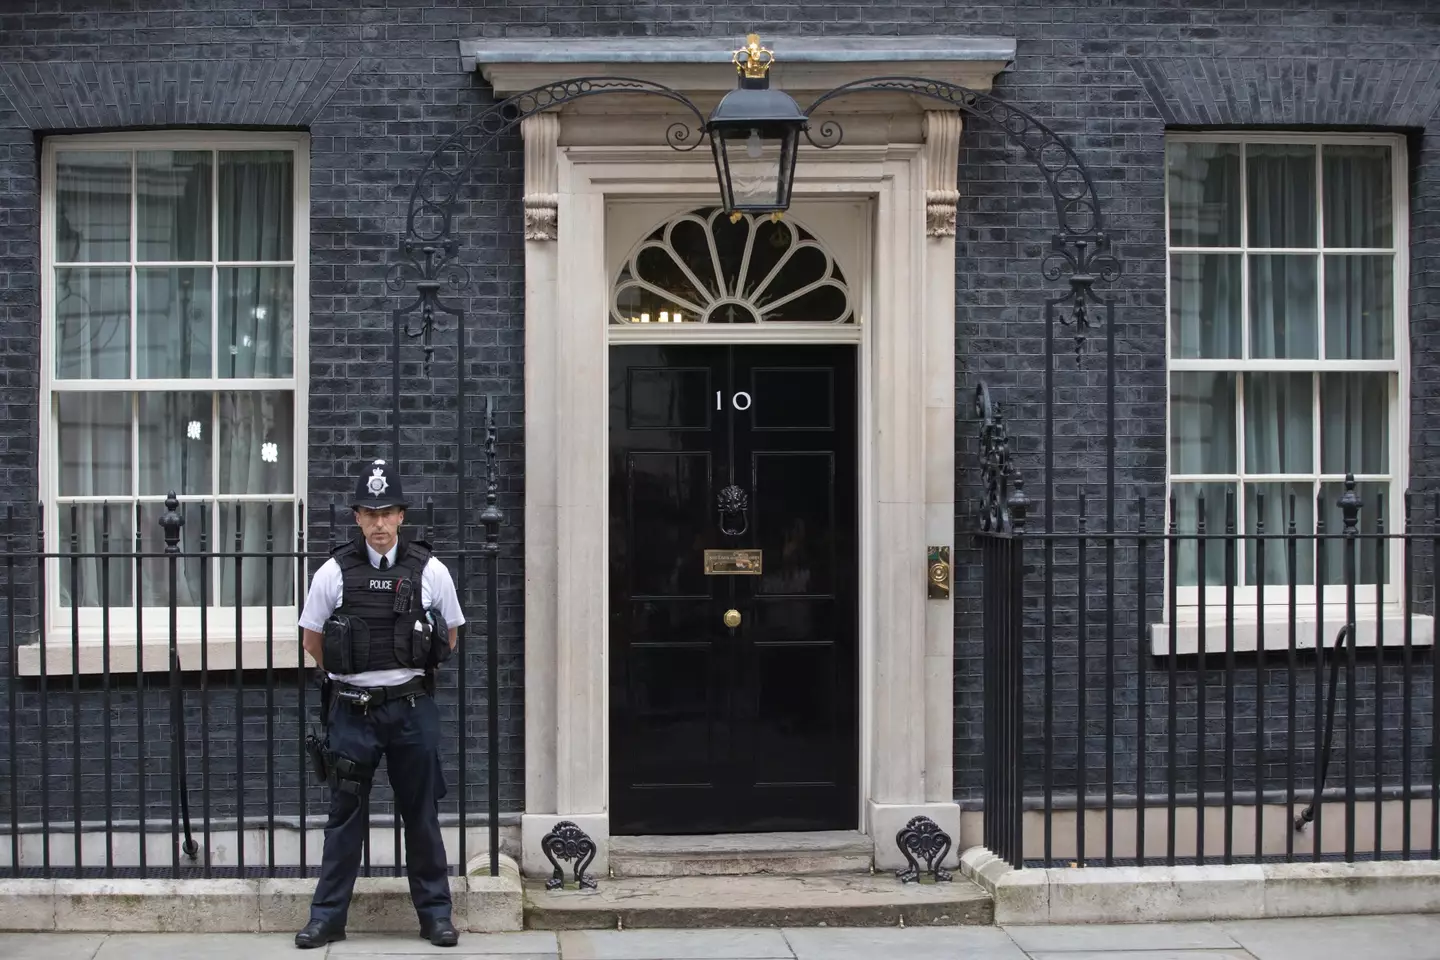 Officer outside 10 Downing Street.